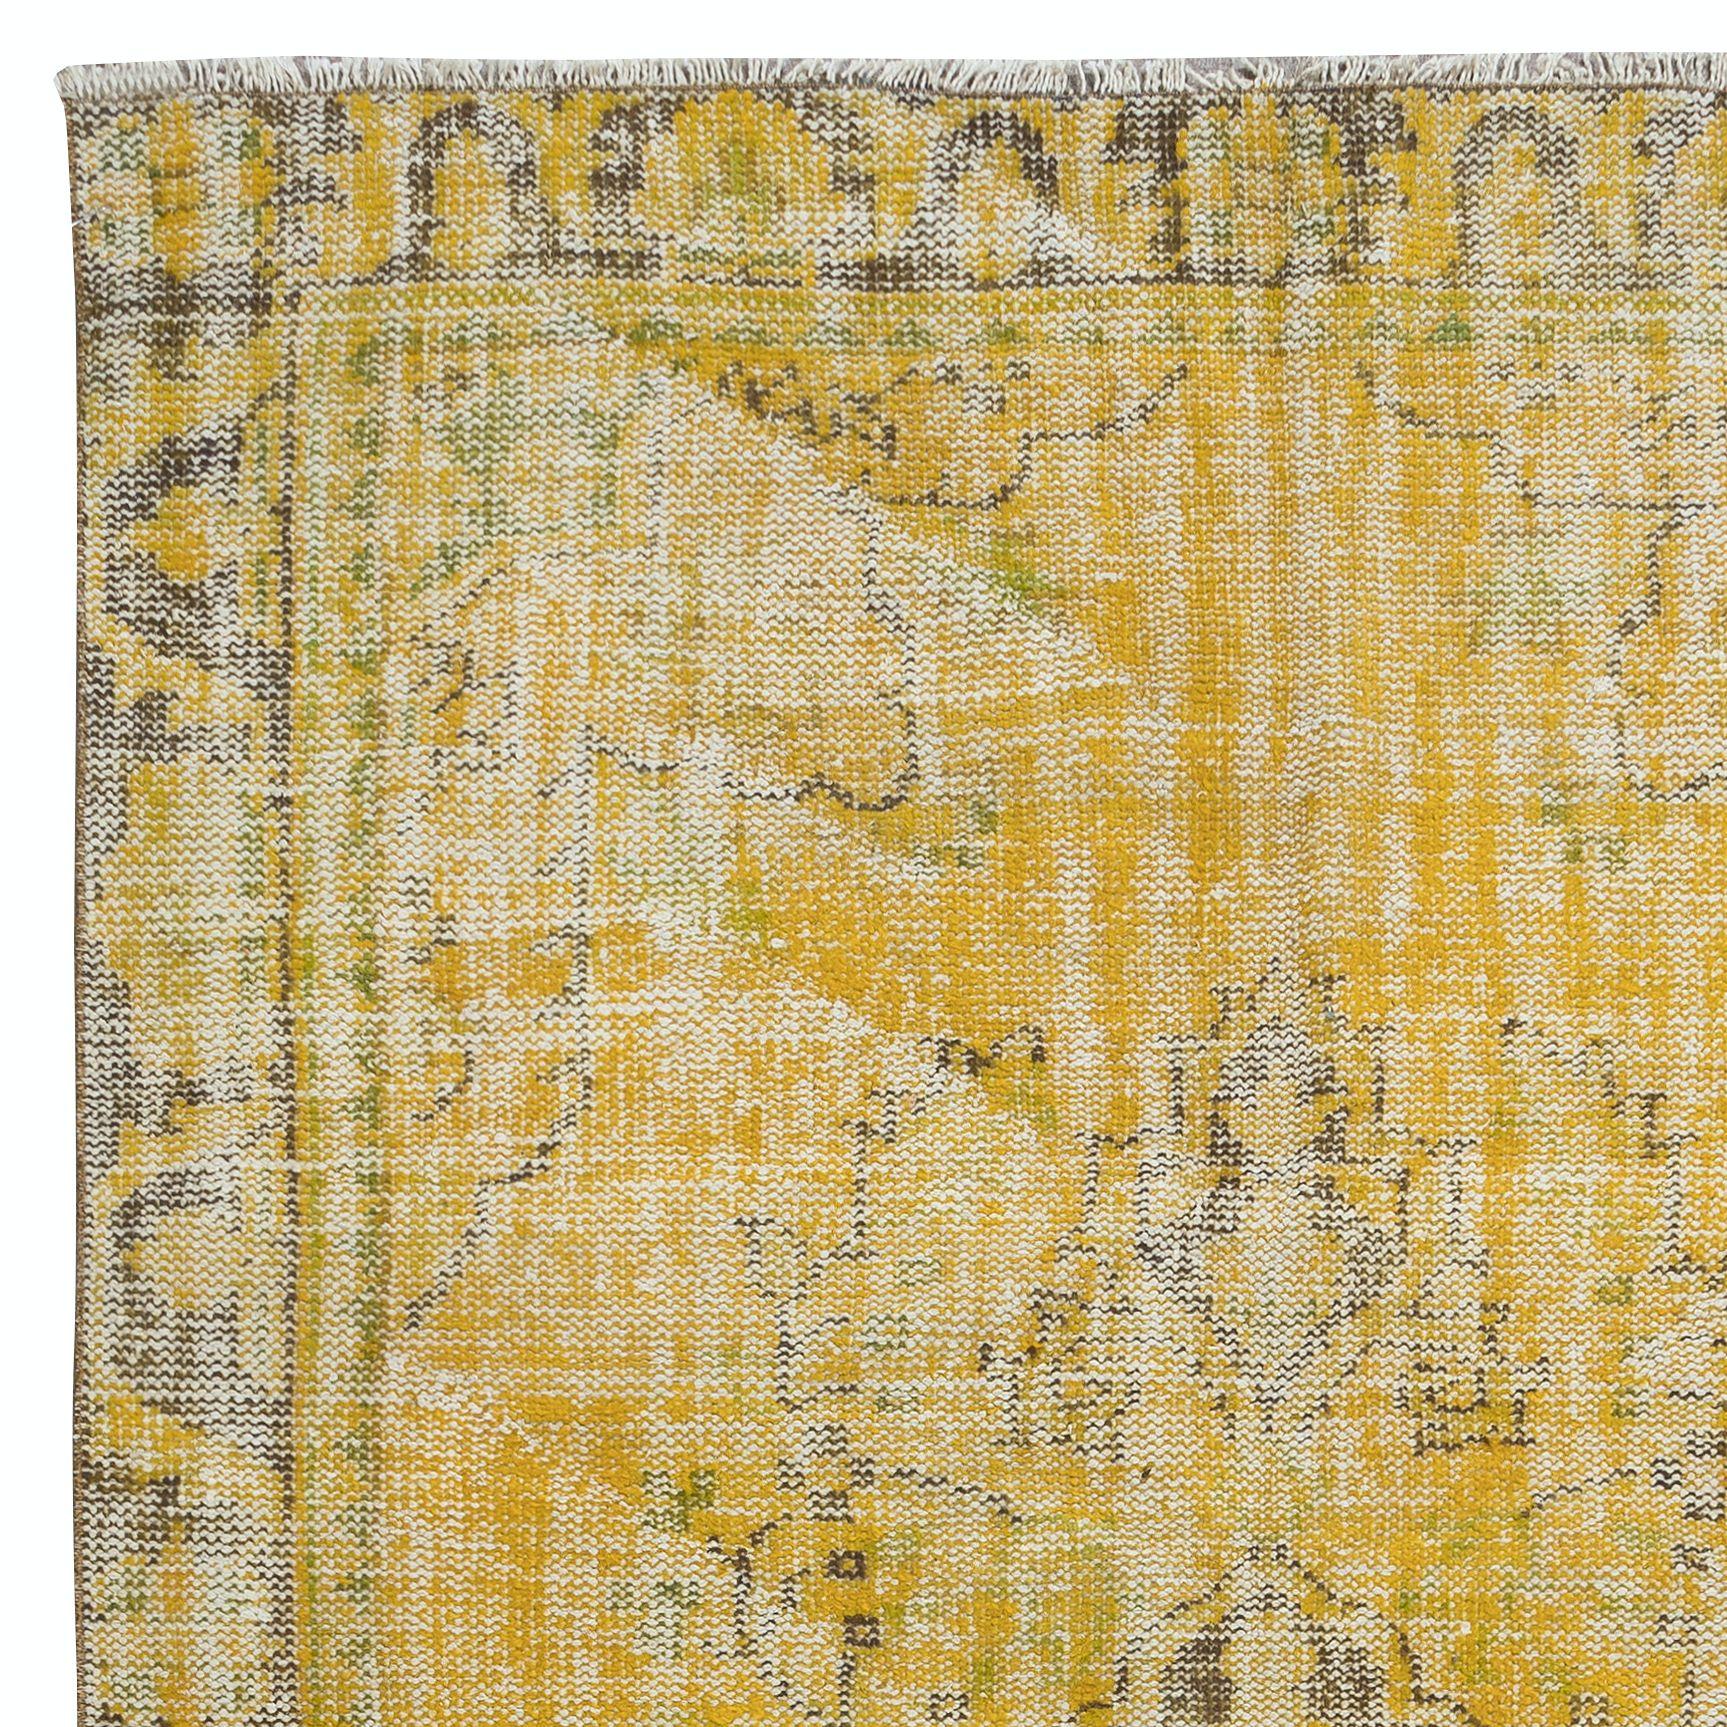 Turkish 5.7x9.6 Ft Yellow Area Rug From Turkey, Hand Knotted Contemporary Wool Carpet For Sale